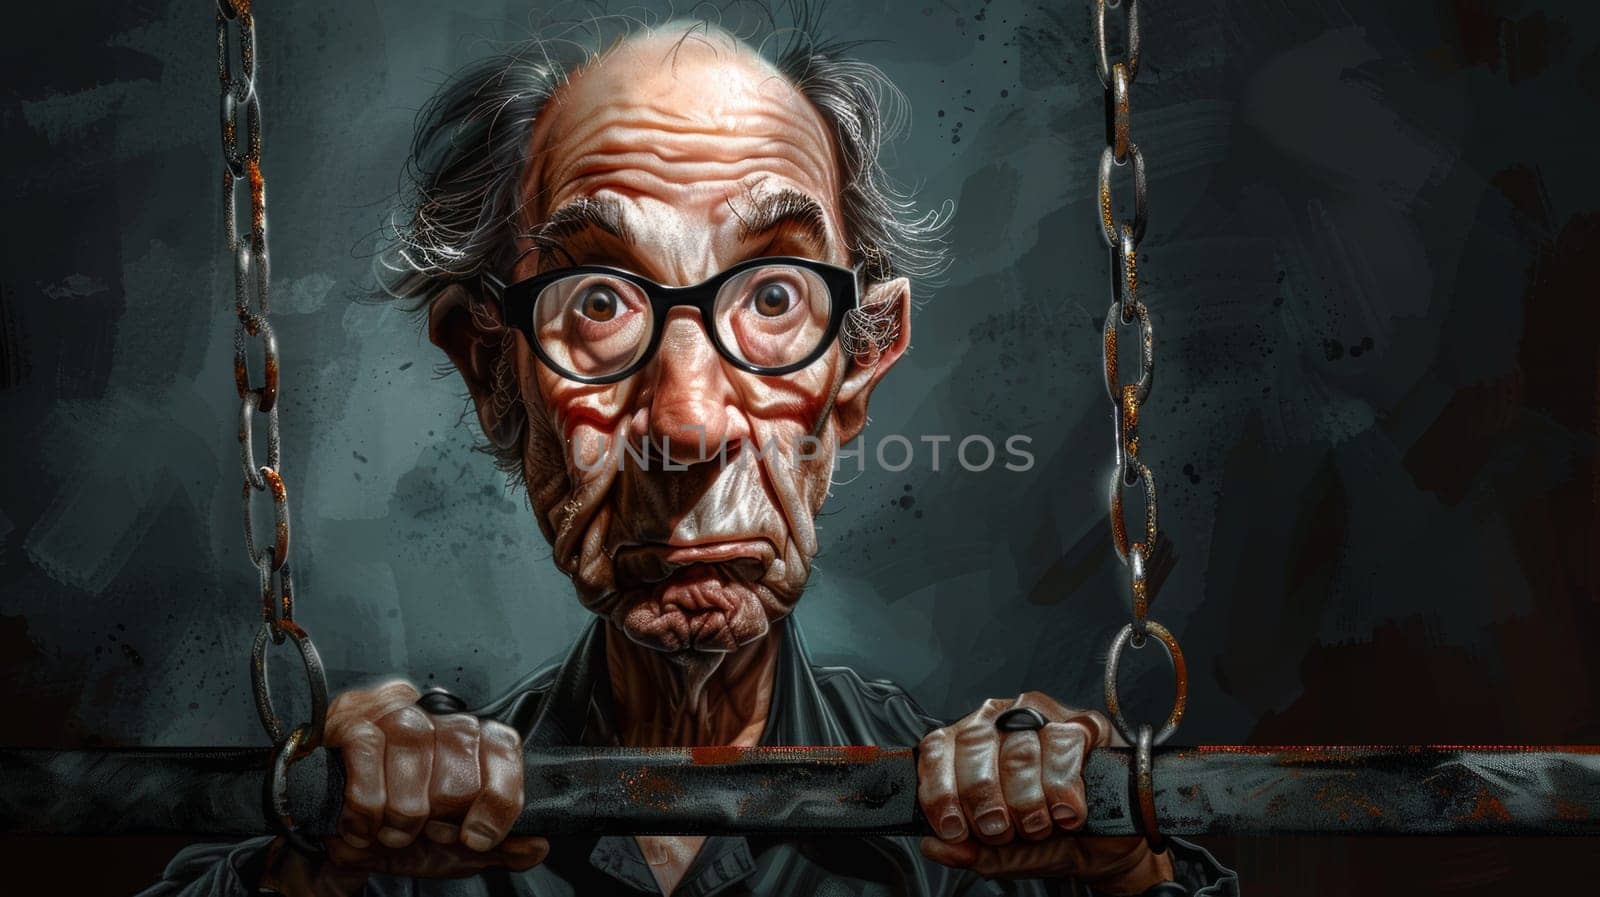 A cartoon of a man with glasses and an old face is chained to the bars, AI by starush